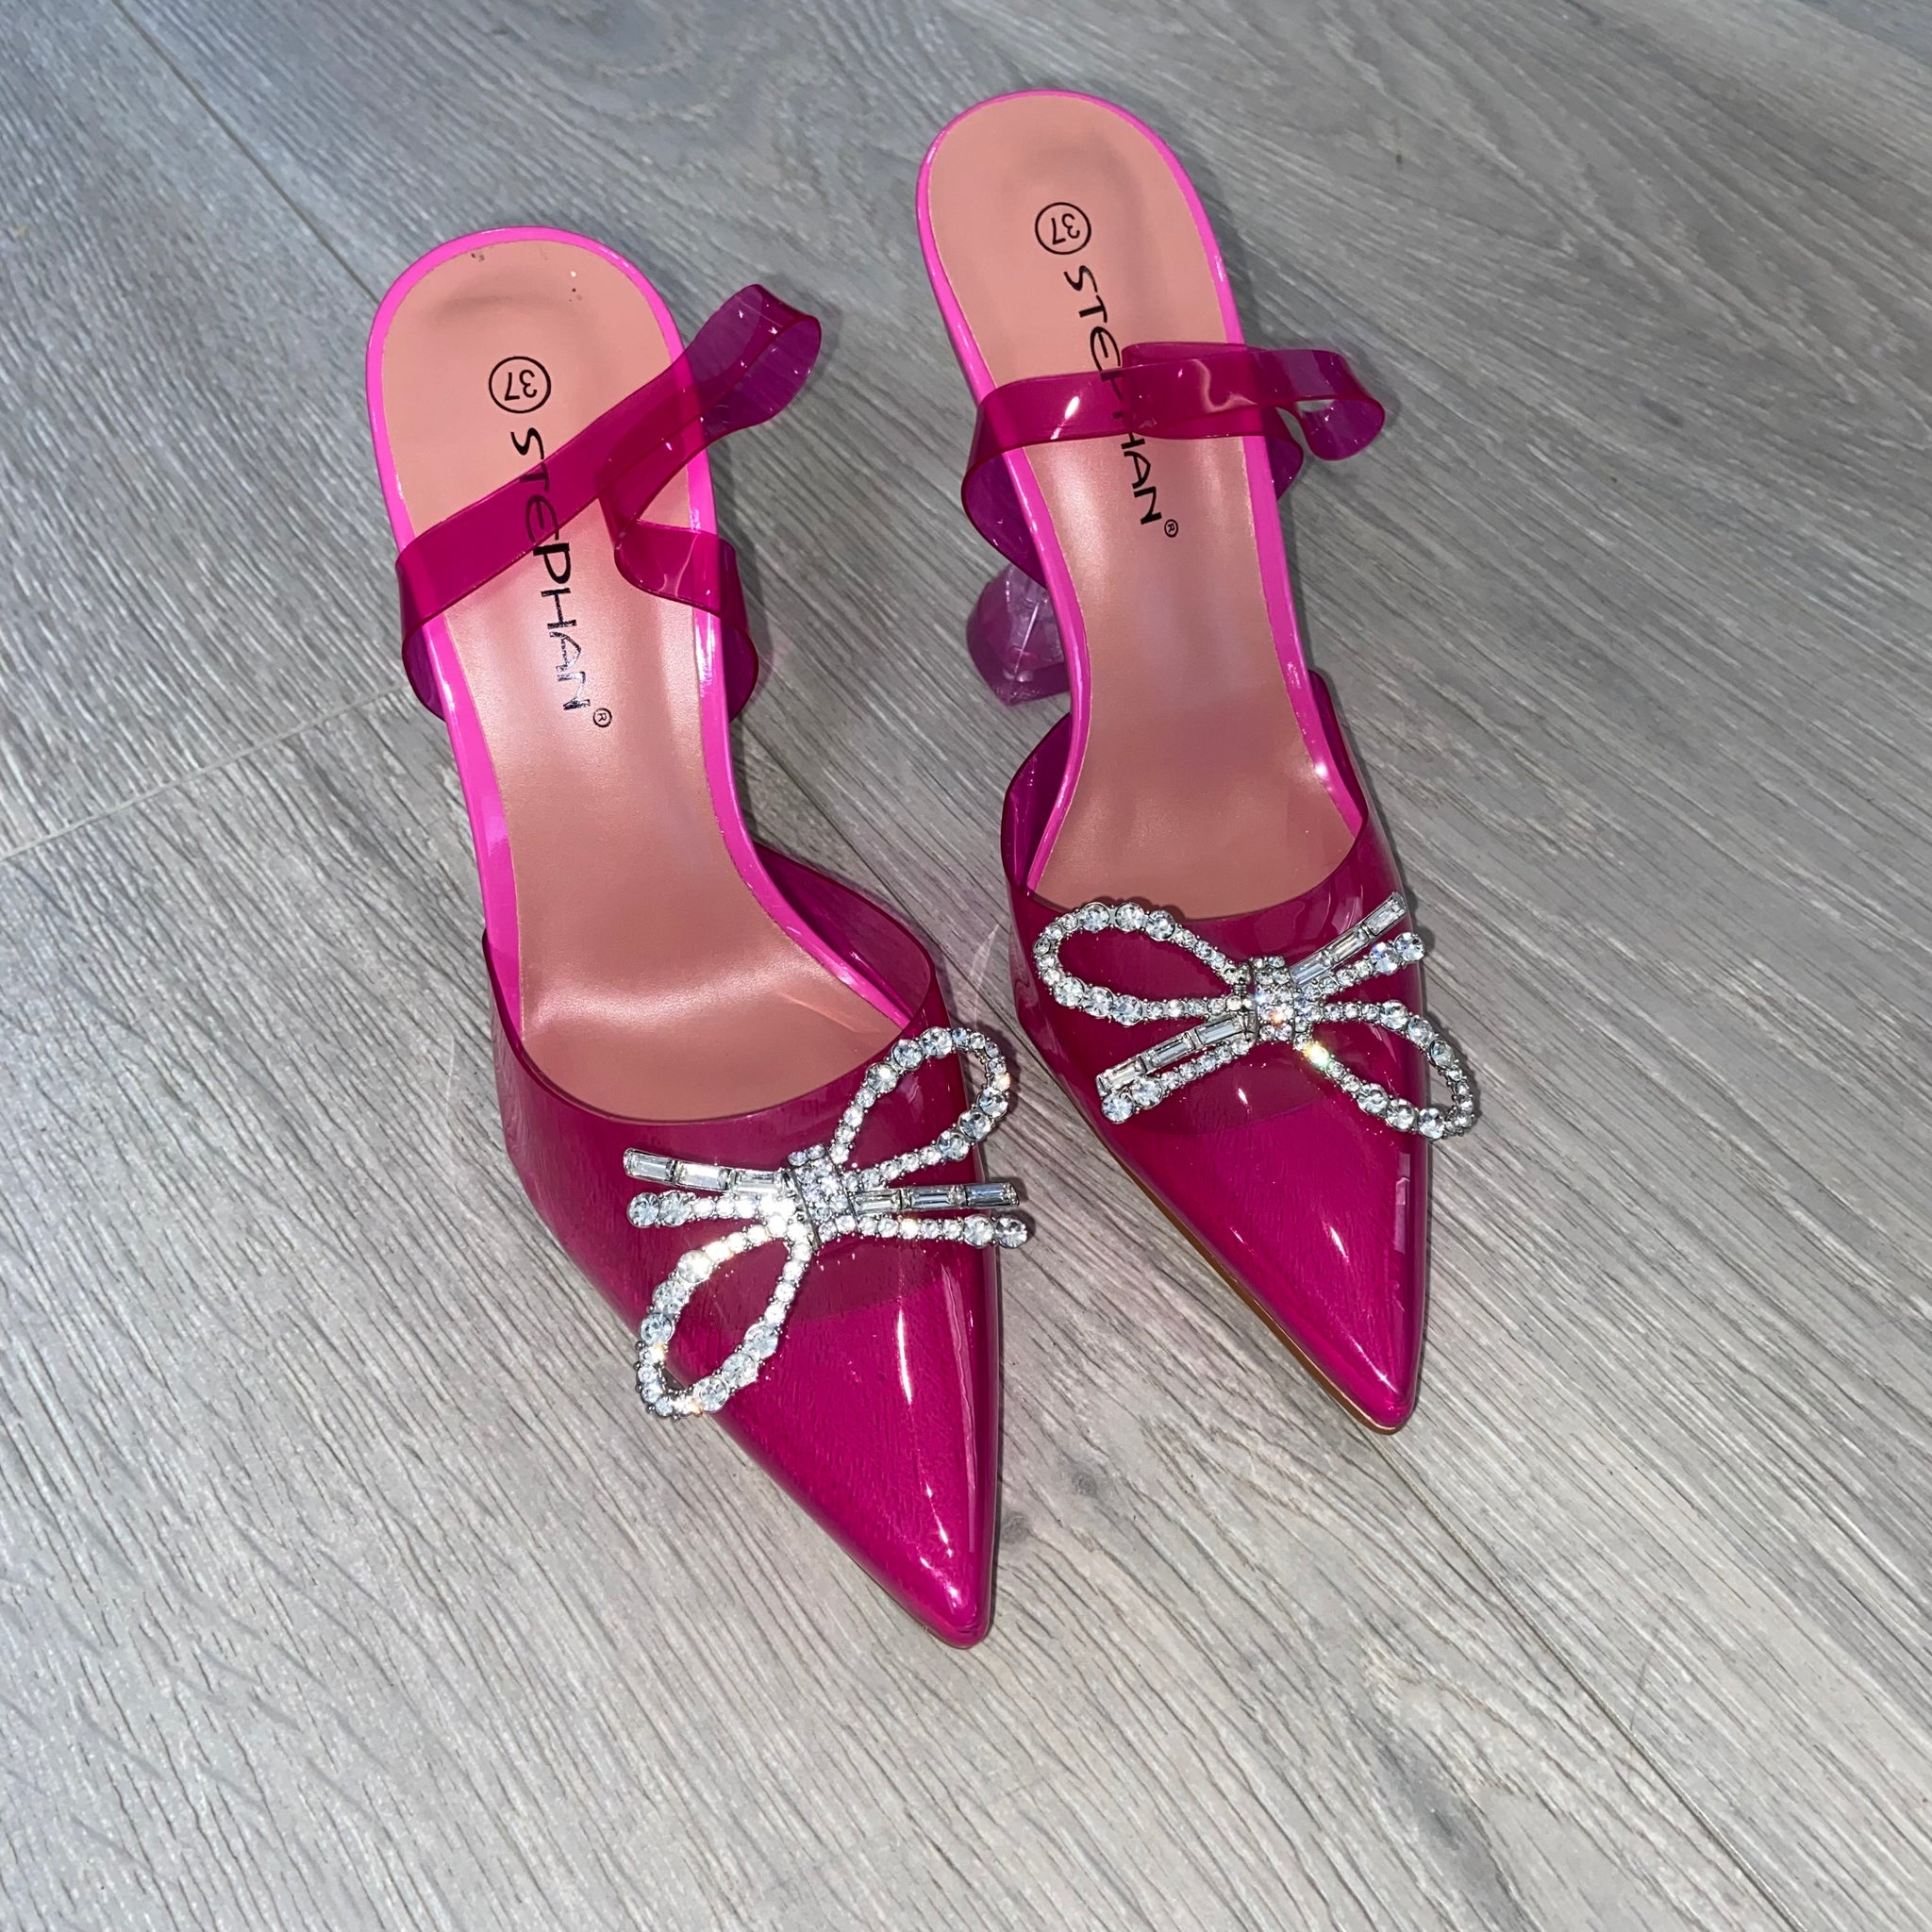 Bow Back Two Part Heels | Pink heels, Heels, Bow back